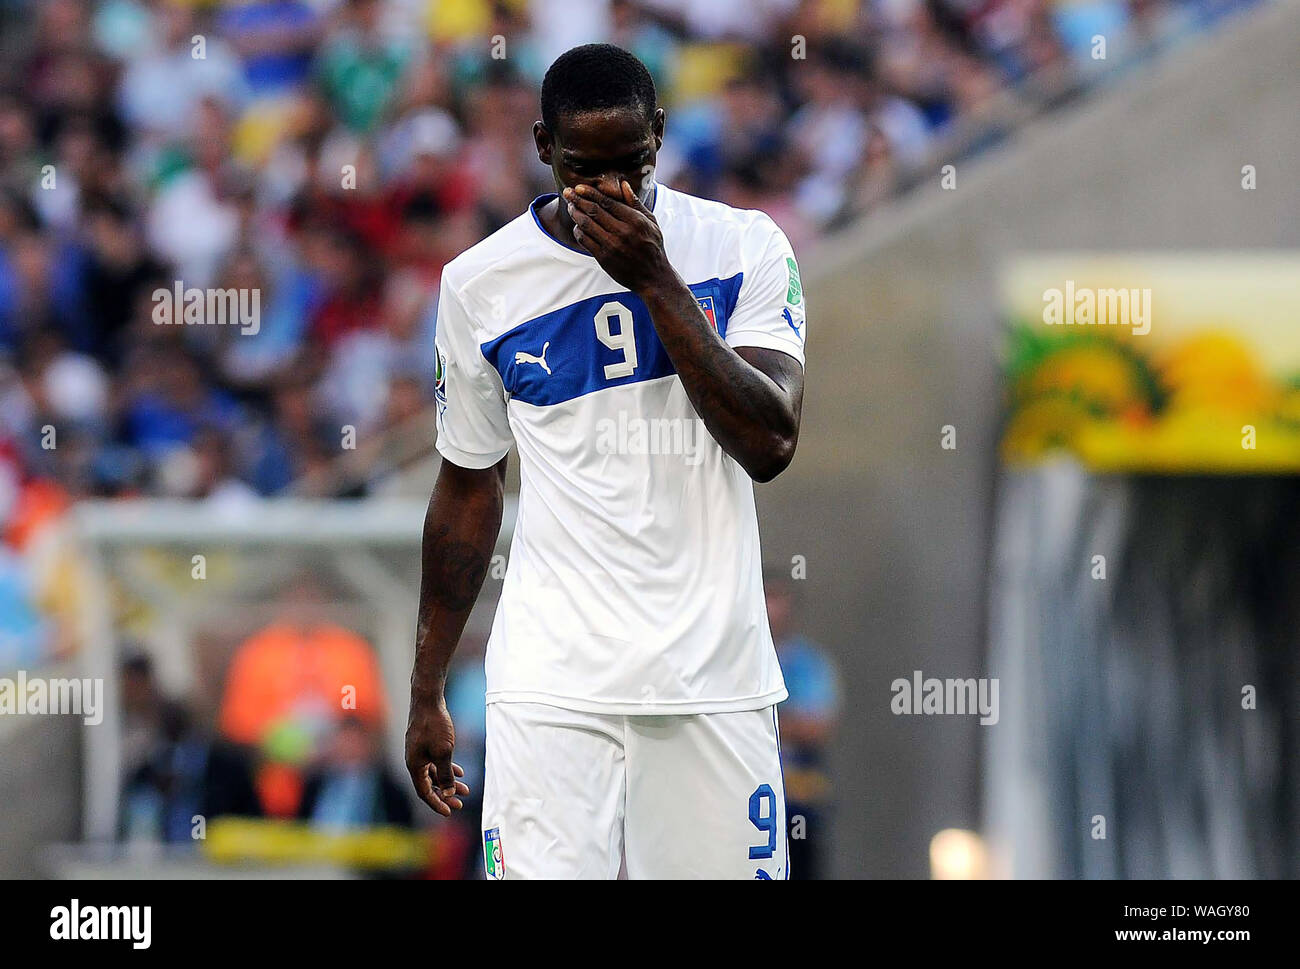 Rio de Janeiro, Brazil, June 16, 2013. Player of Italy's Balotelli squad during the Mexico vs Italy match for the Confederations Cup at Maracana Stadi Stock Photo